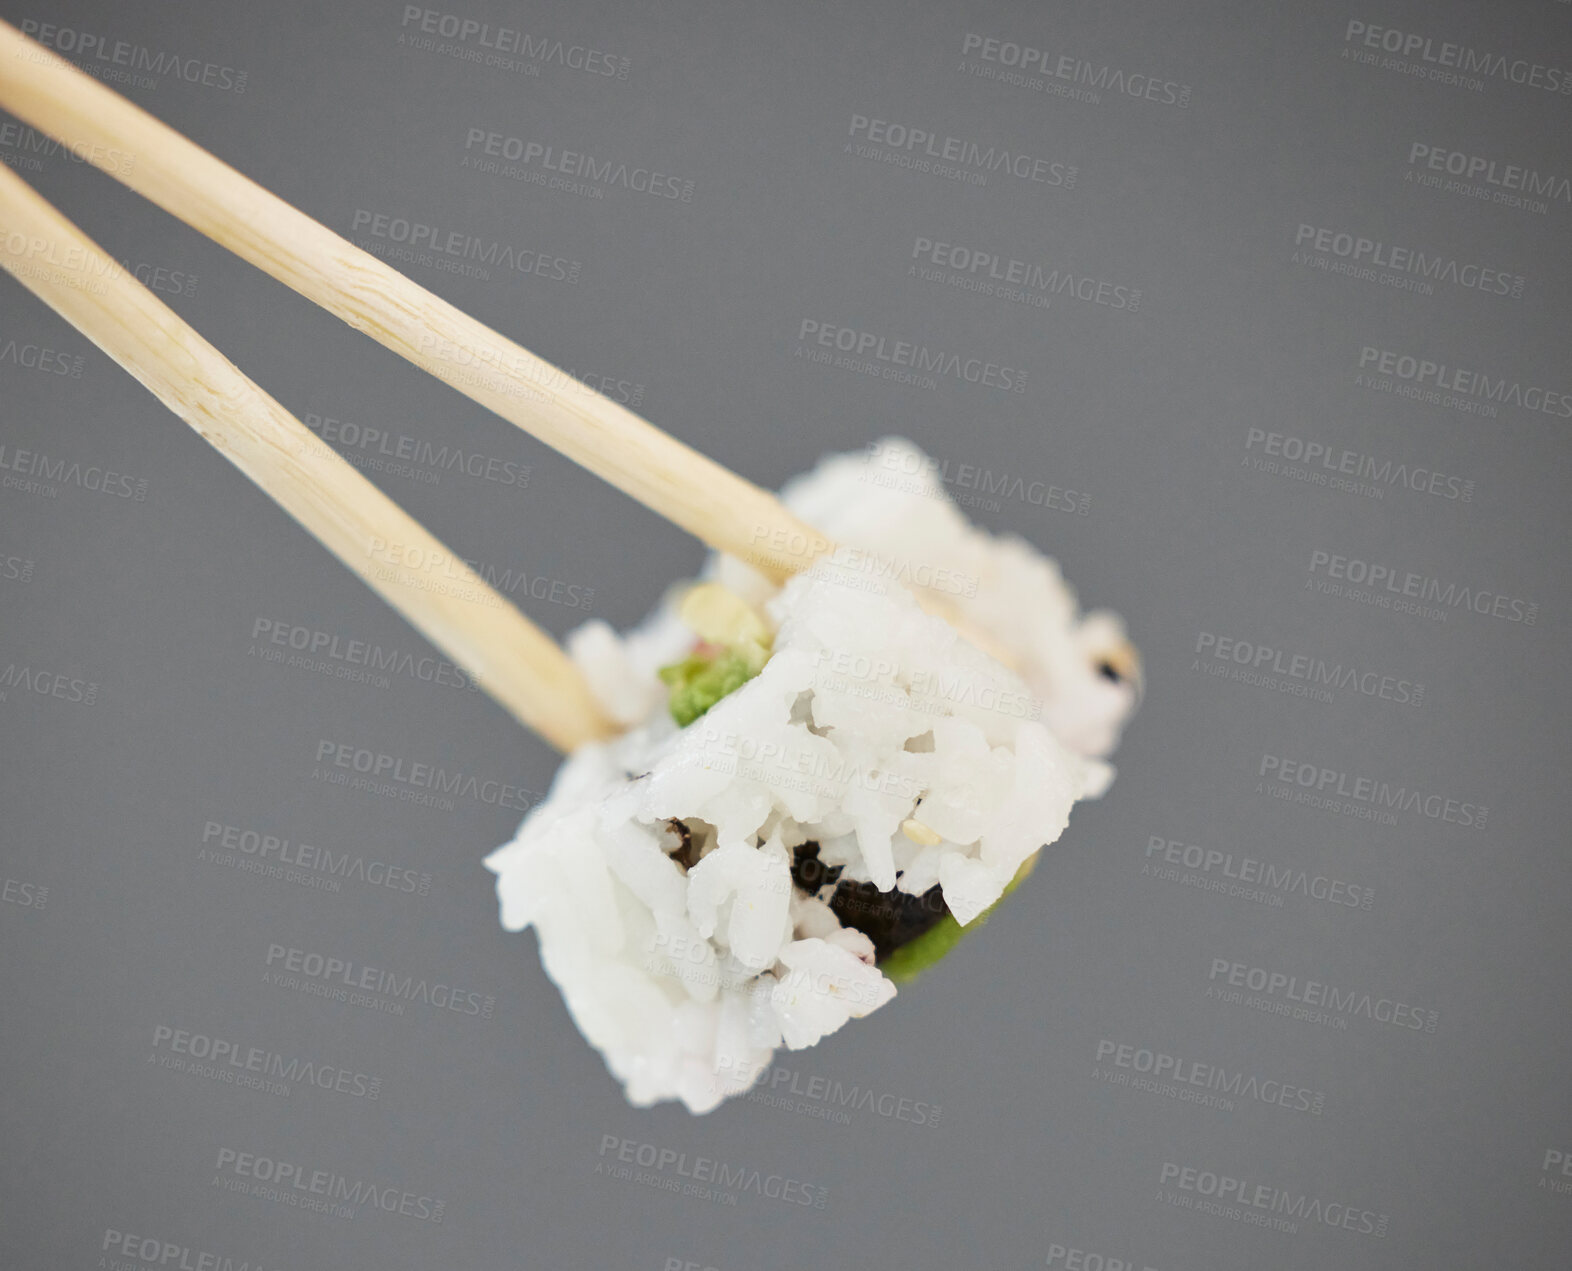 Buy stock photo Seafood, sushi and chopsticks on studio background, California roll with seaweed for healthy Asian dining promo. Japanese food culture with rice, raw fish and avocado, restaurant menu offer or deal.